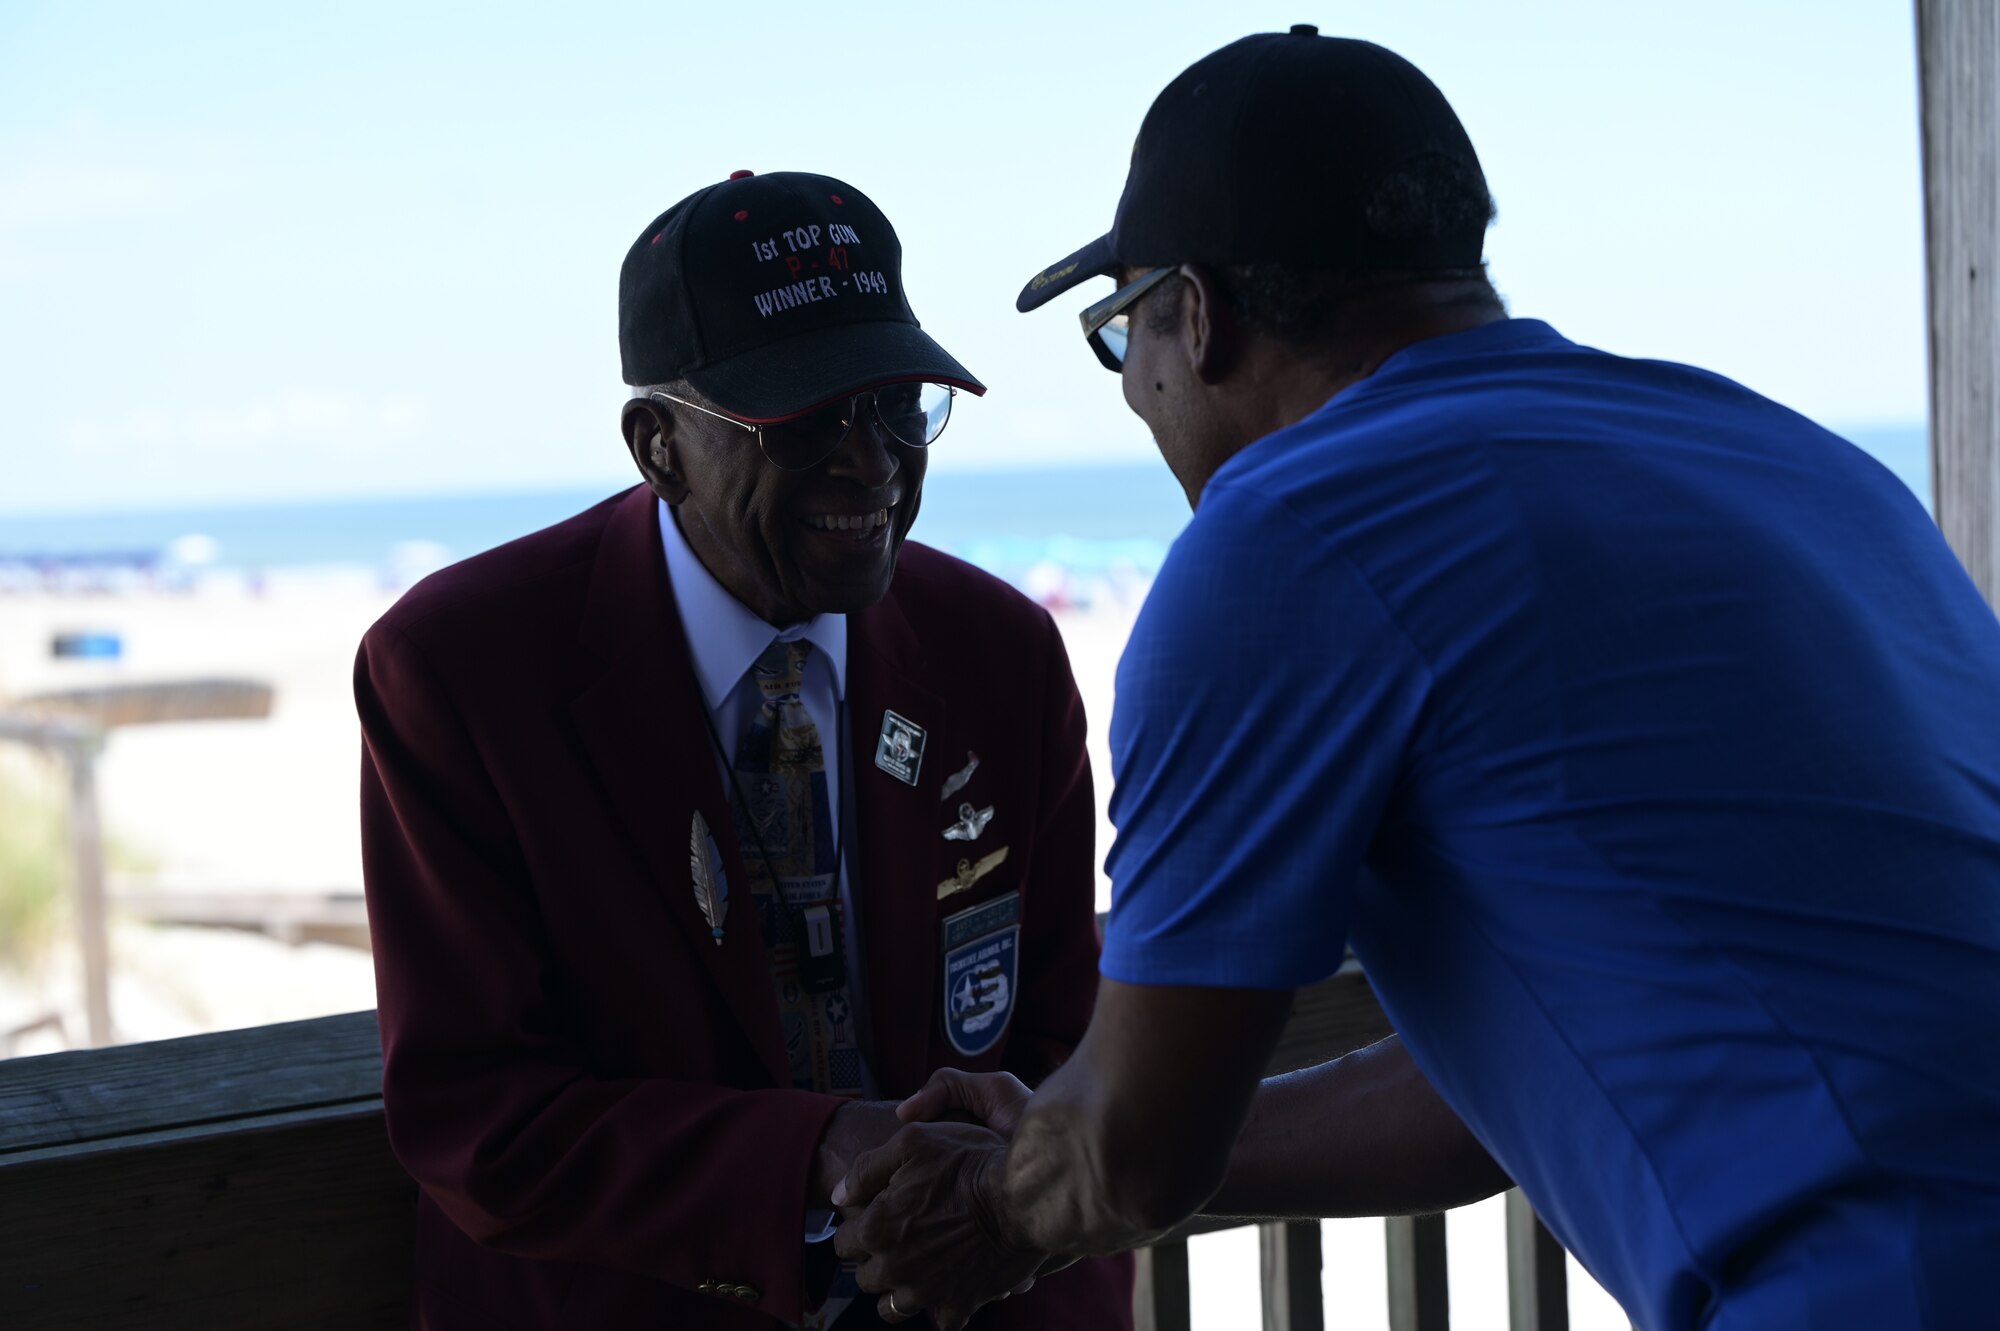 U.S. Air Force Lt. Col. James H. Harvey III, one of the original Tuskegee Airmen pilots with the 332nd Fighter Group, greets a U.S Army veteran, during a F-22 practice aerial demonstration, Sept. 13, 2023, at Tybee Island Beach, Georgia. This community event allowed residents of Savannah, Georgia and spectators of surrounding counties to be involved in the historic William Tell competition taking place at Savannah Air National Guard Base, Georgia. (U.S. Air National Guard photo by Senior Airman Christa Ross)